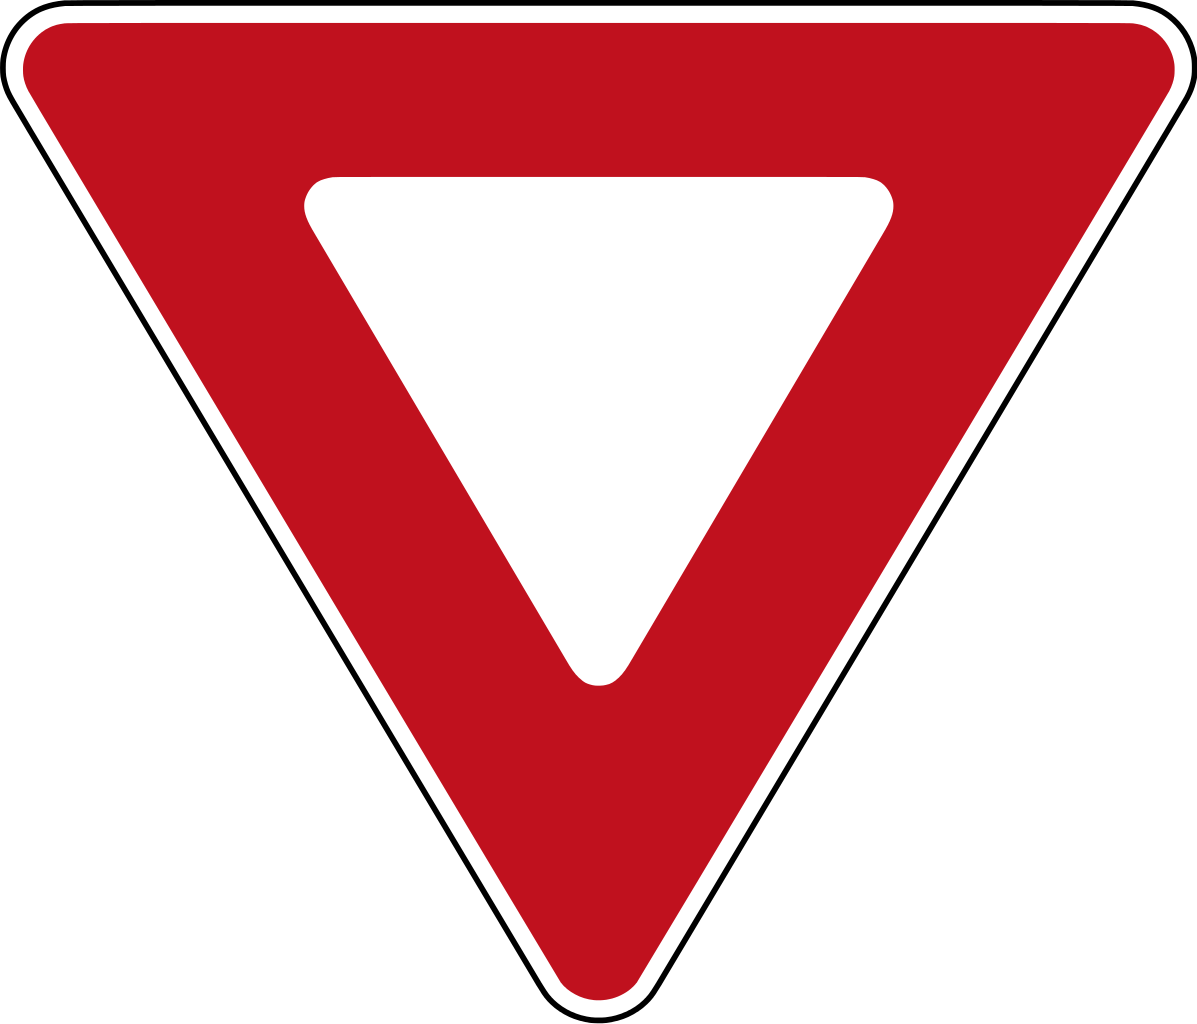 File:Canada - yield sign.svg